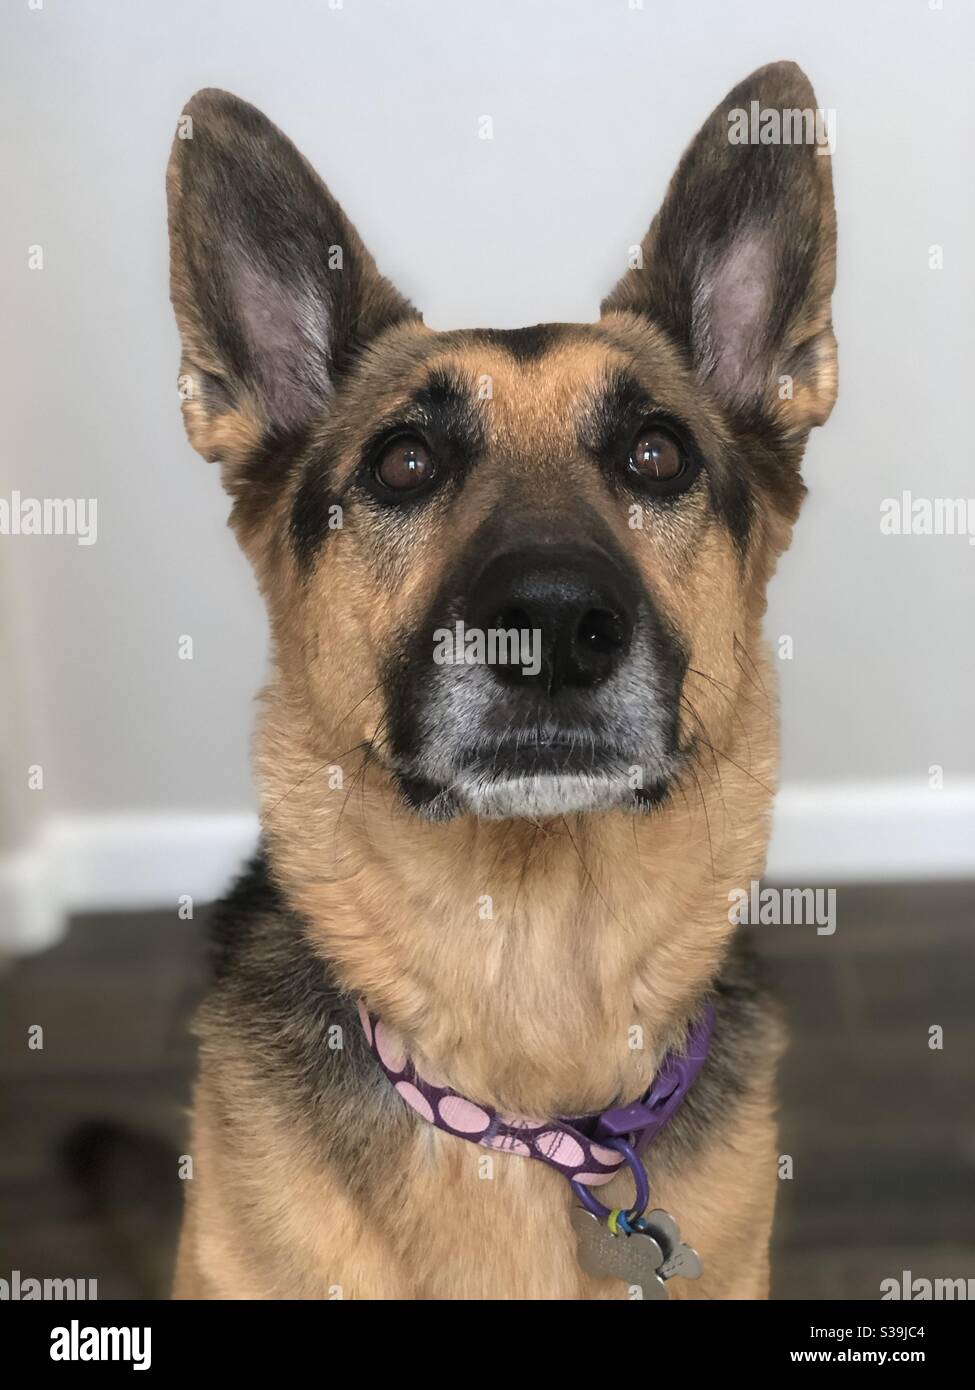 German Shepherd Dog looking at the camera while sitting and wearing a purple and pink collar Stock Photo